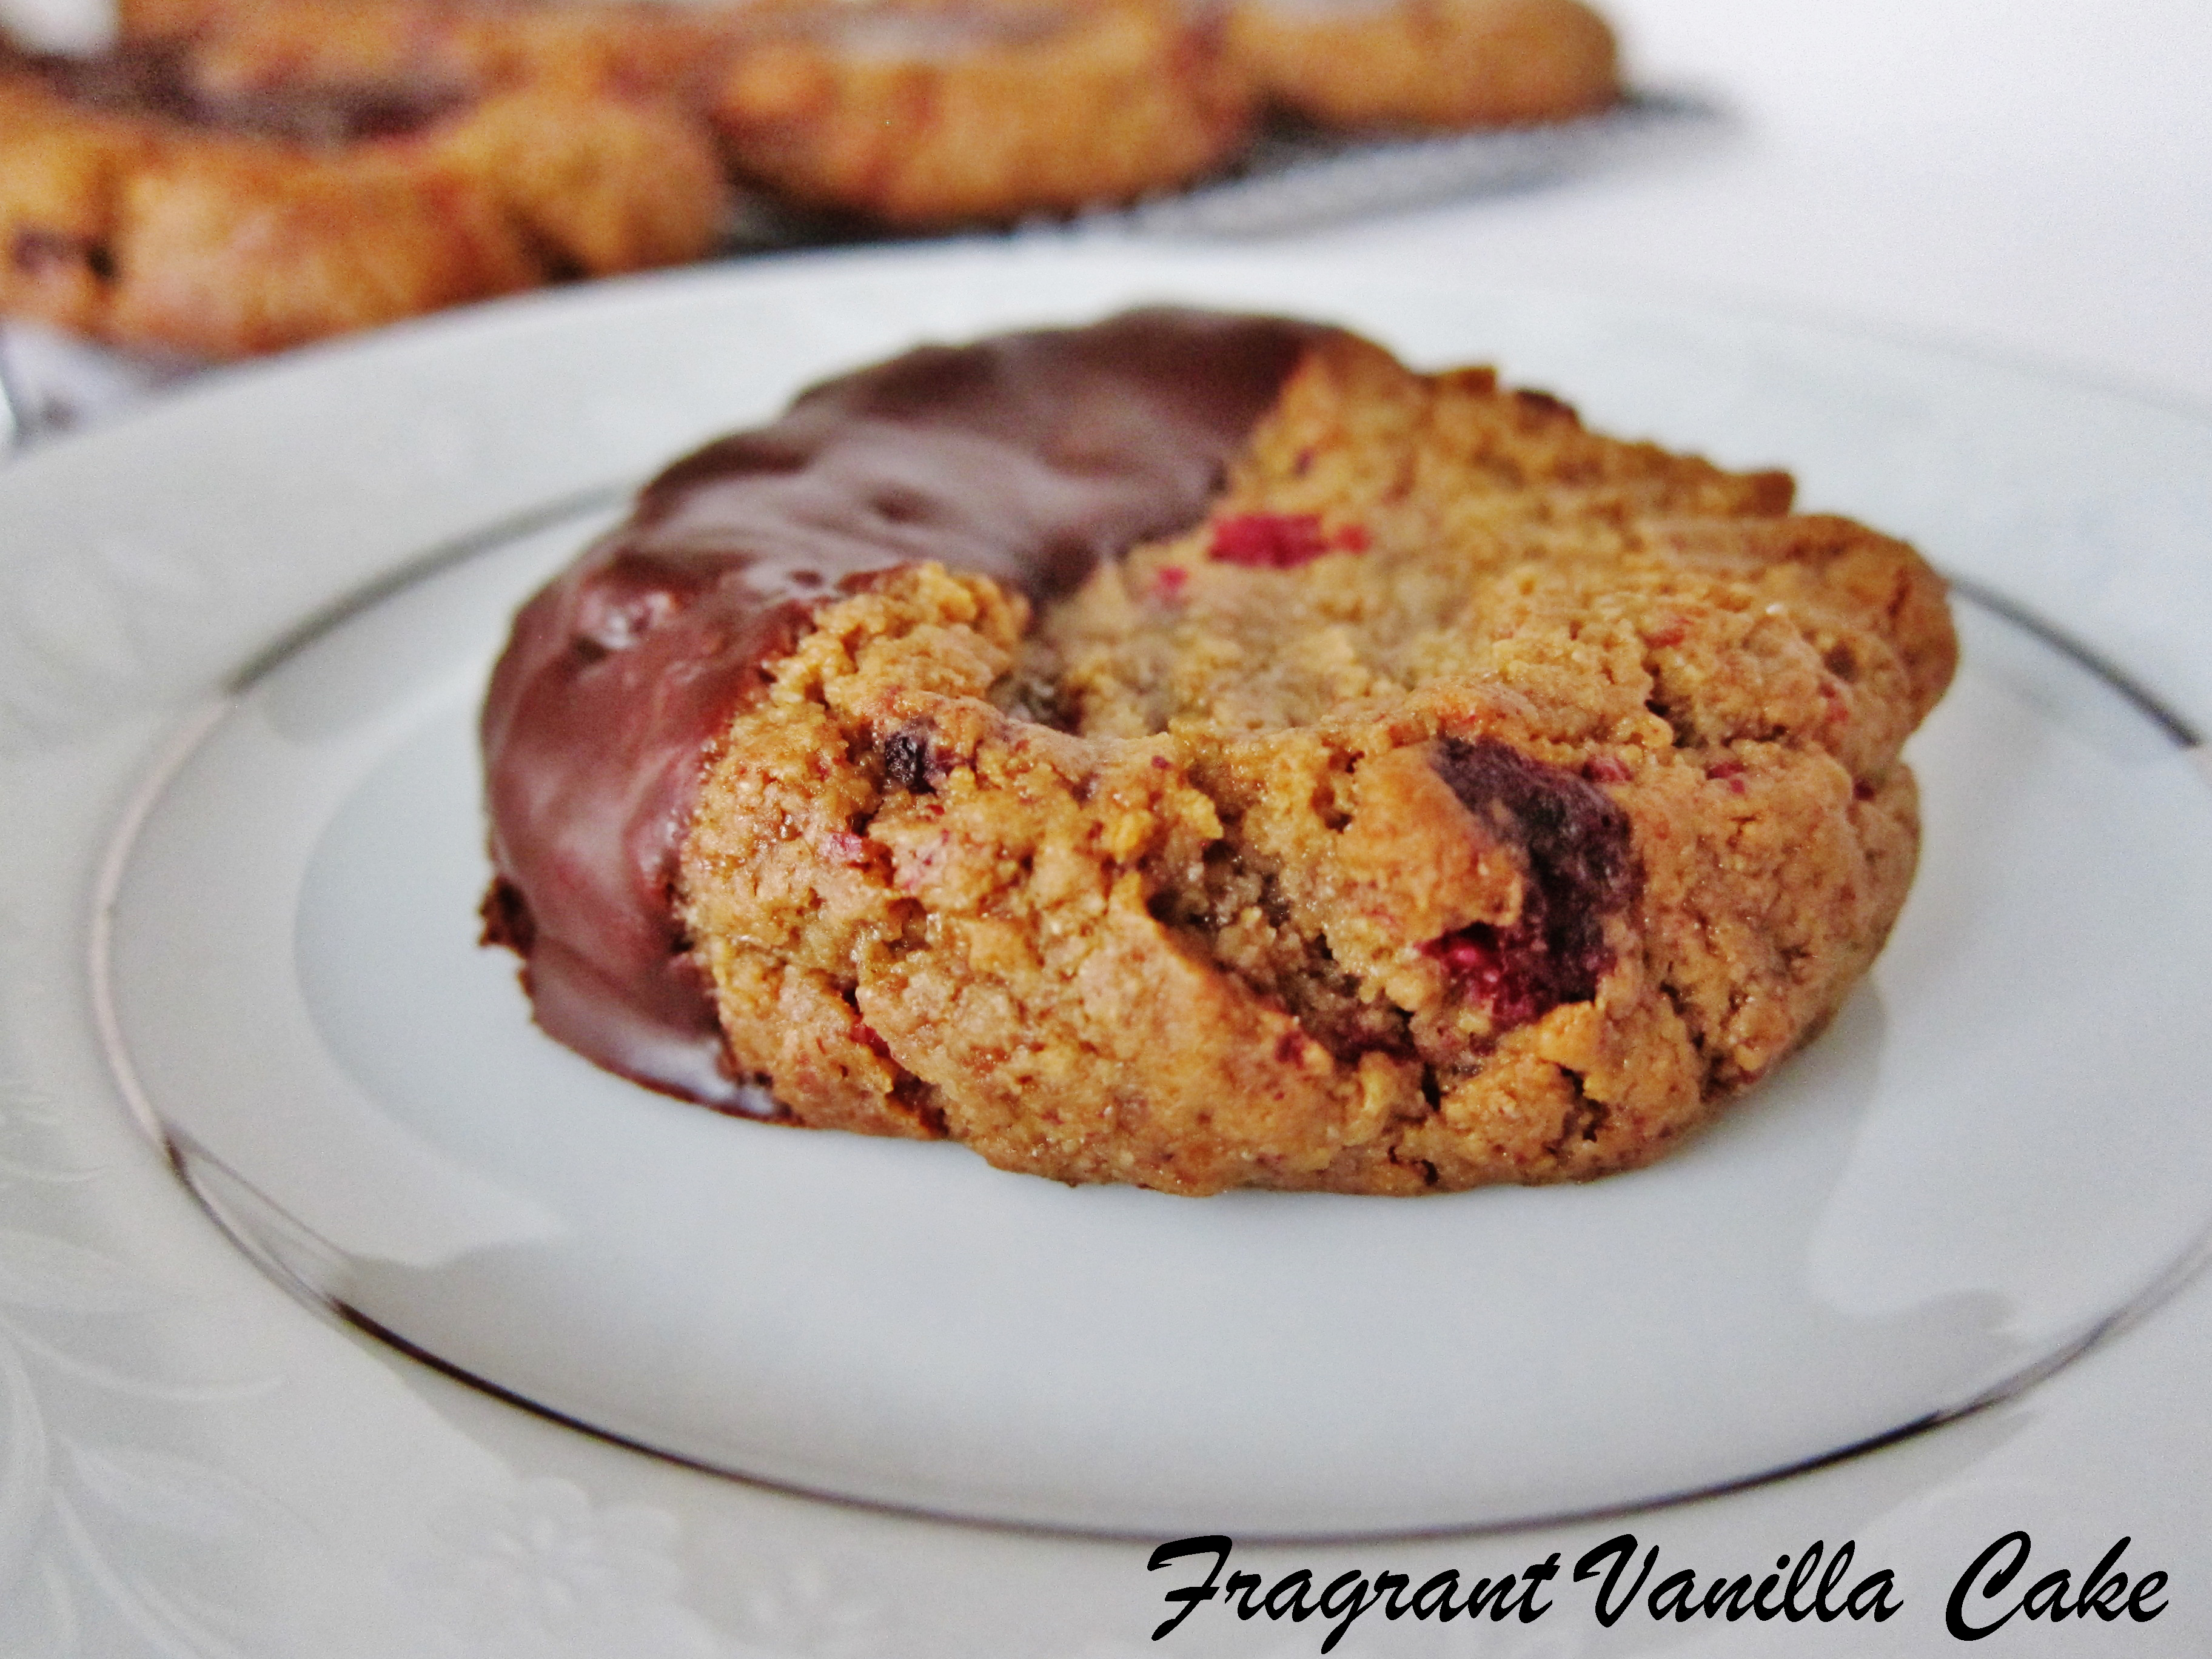 Vegan Chocolate Dipped Hazelnut Butter Cookies with Raspberries and a Giveaway!